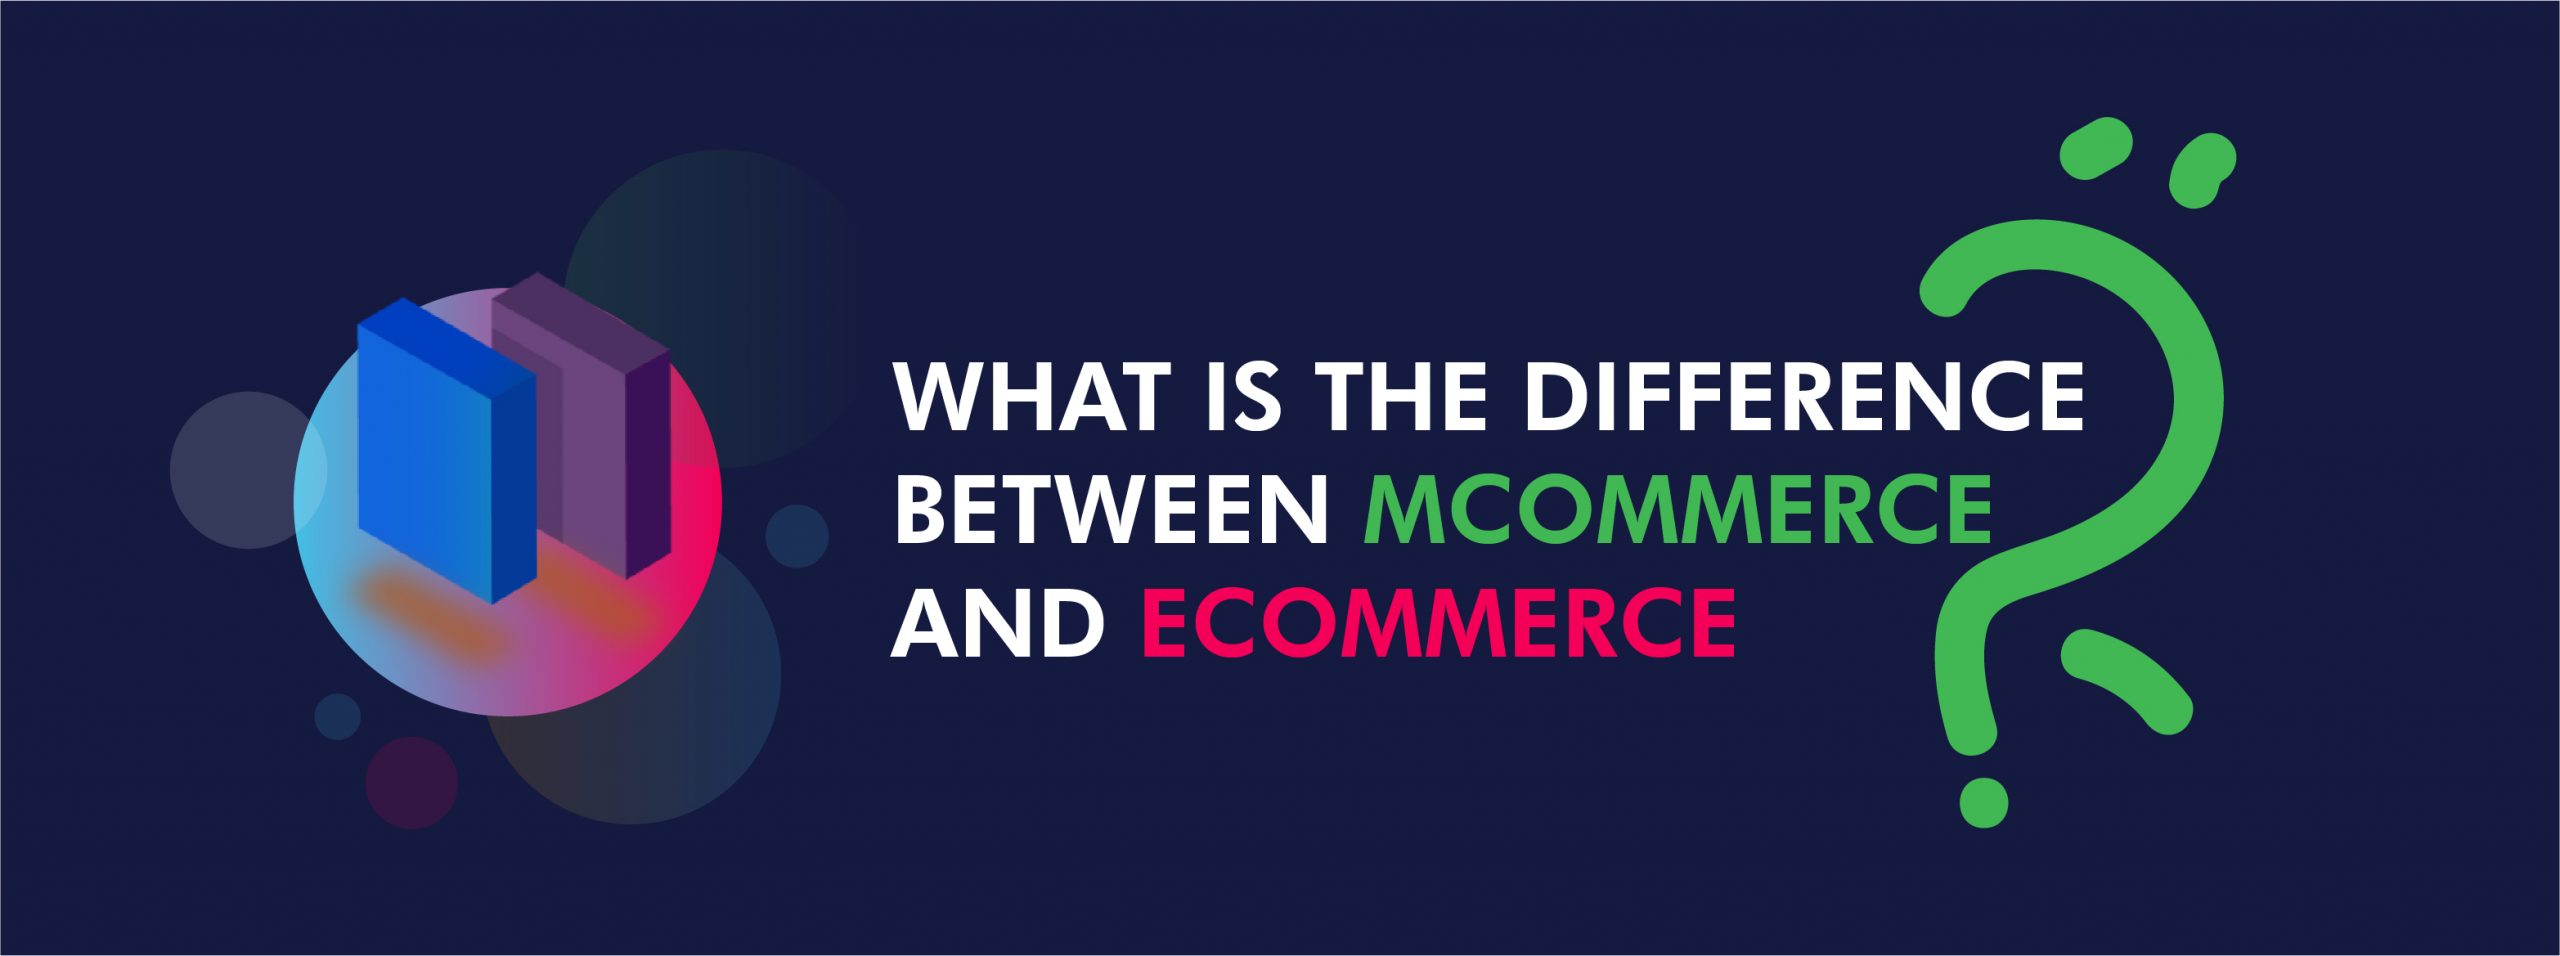 what is different between ecommerce and mcommerce